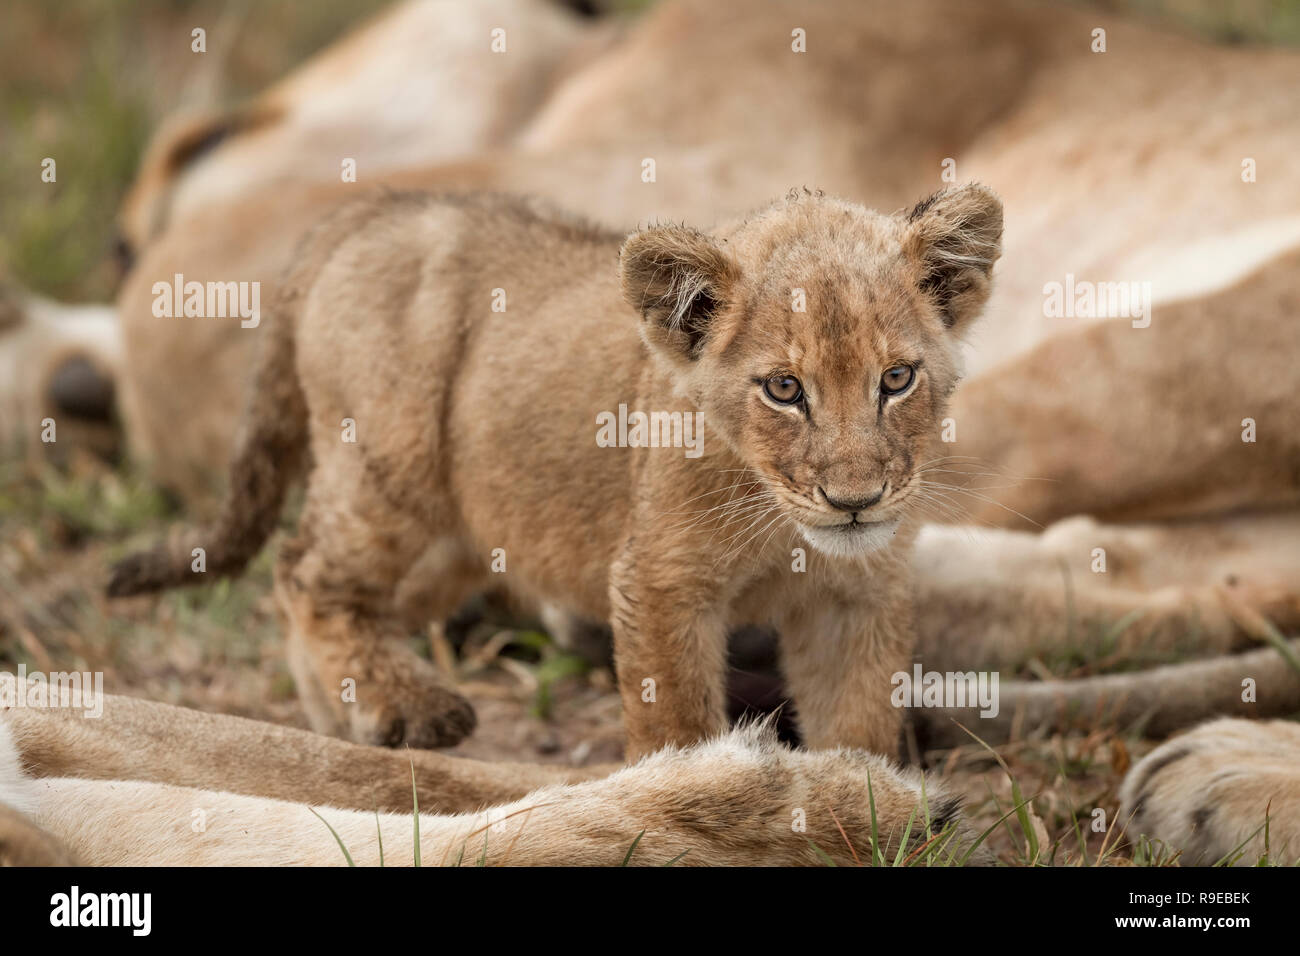 cute baby lion cub standing between sleeping lionesses in grass Stock Photo